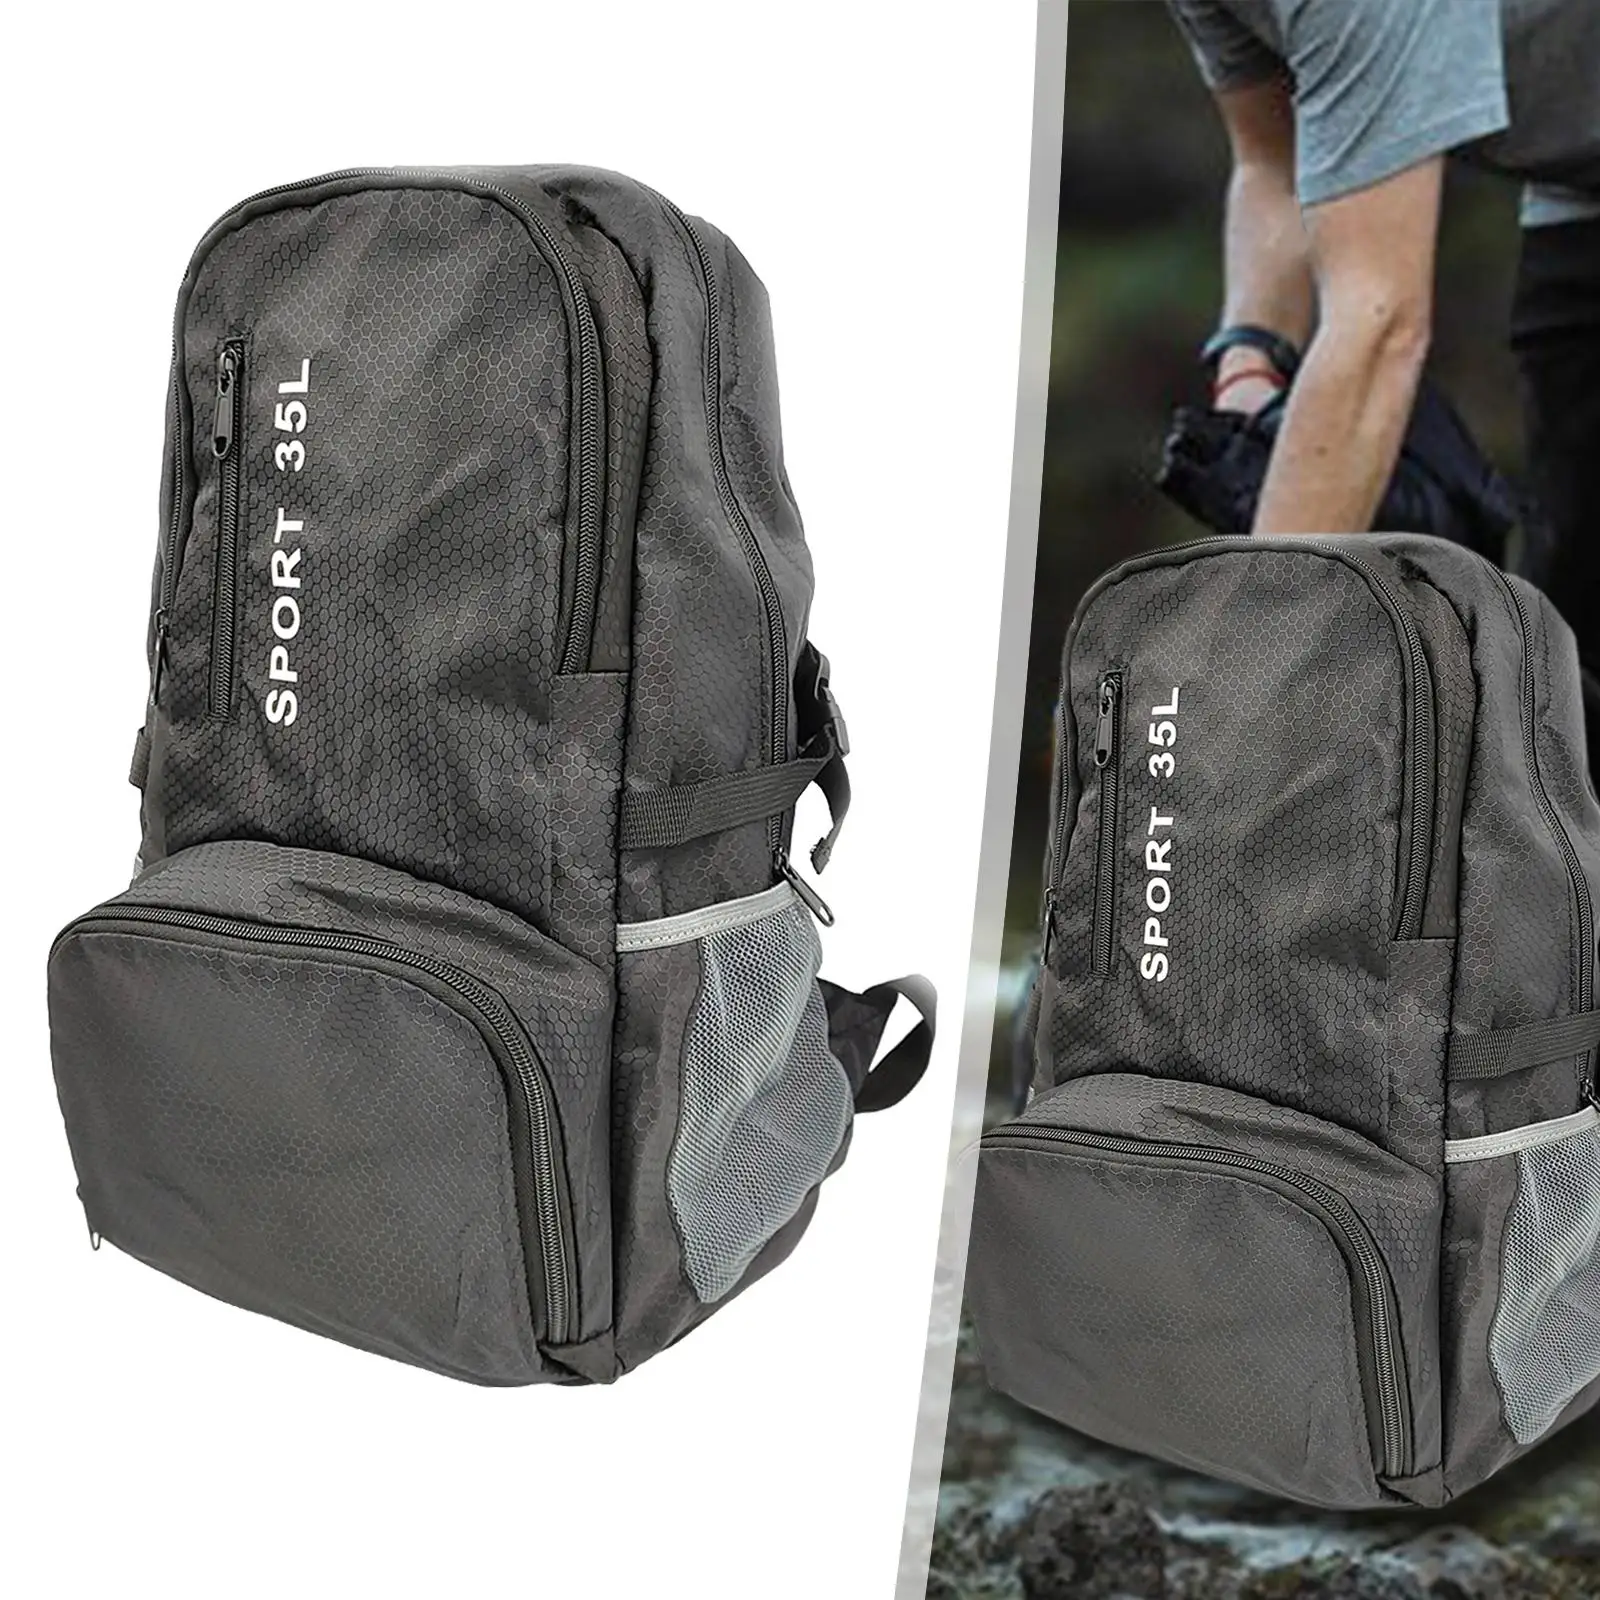 Hiking Backpack Large Unisex Adults Adjustable Portable Foldable Backpack for Outdoor Camping Mountaineering Trekking Survival